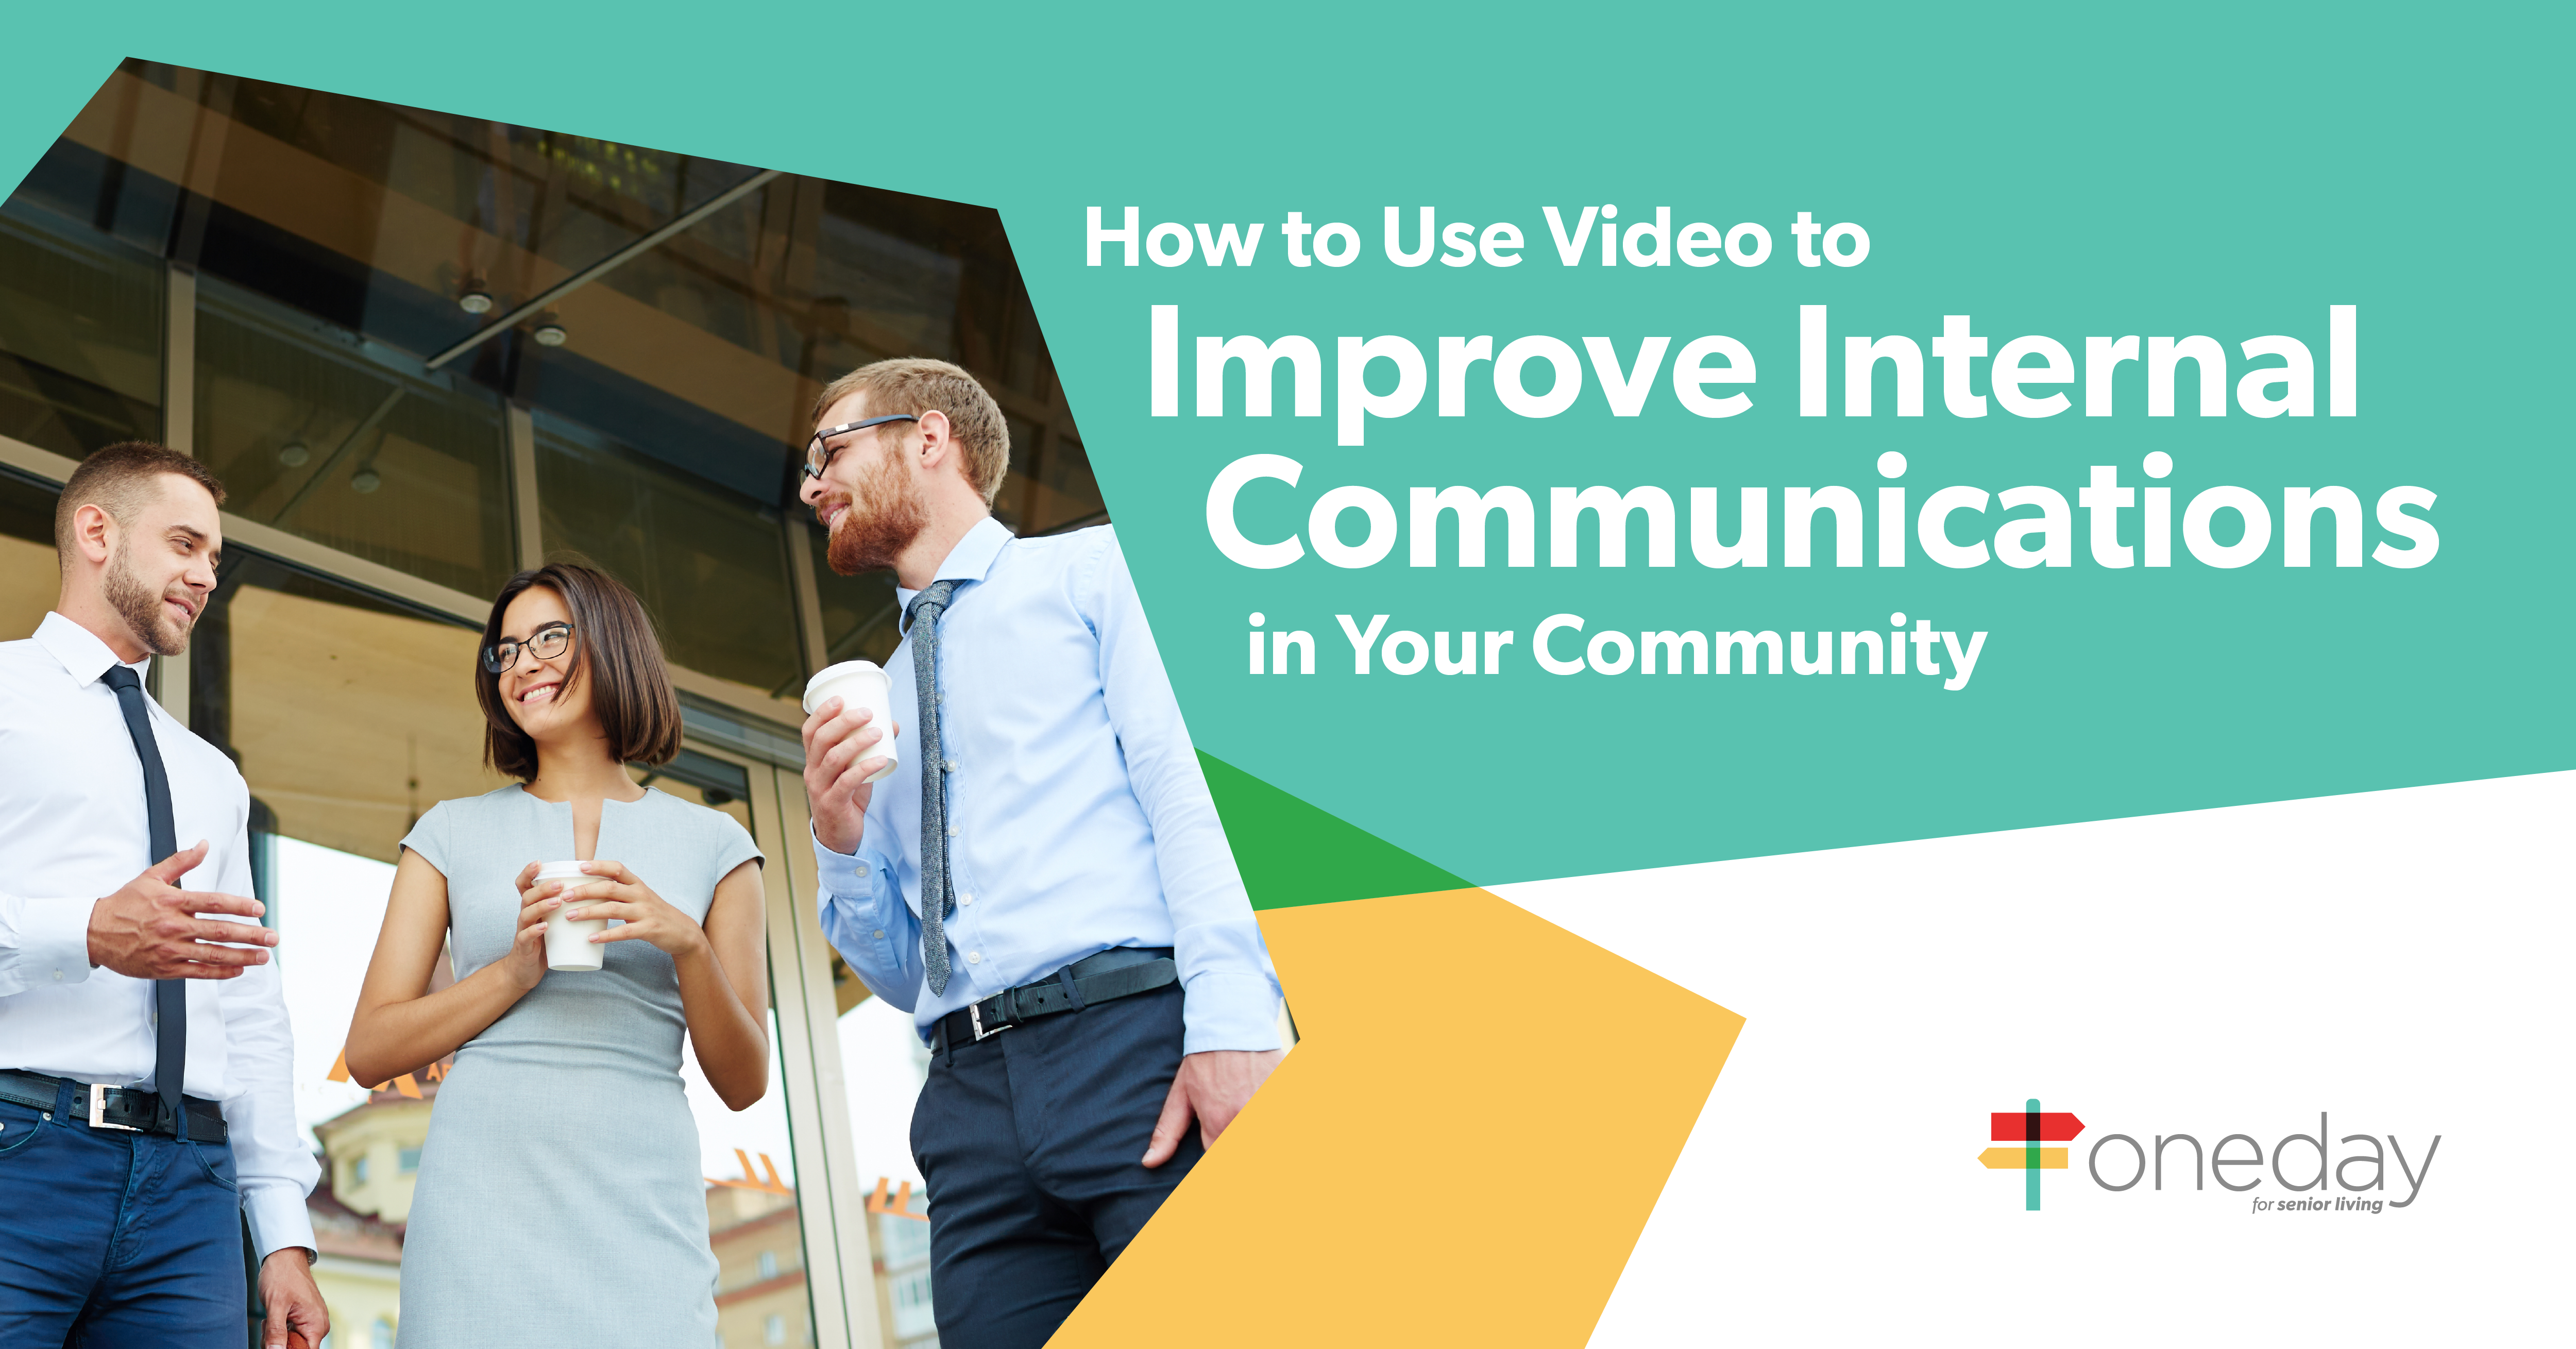 A discussion on four simple ways senior living communities can use video to improve internal communications and keep operations efficient and strong.